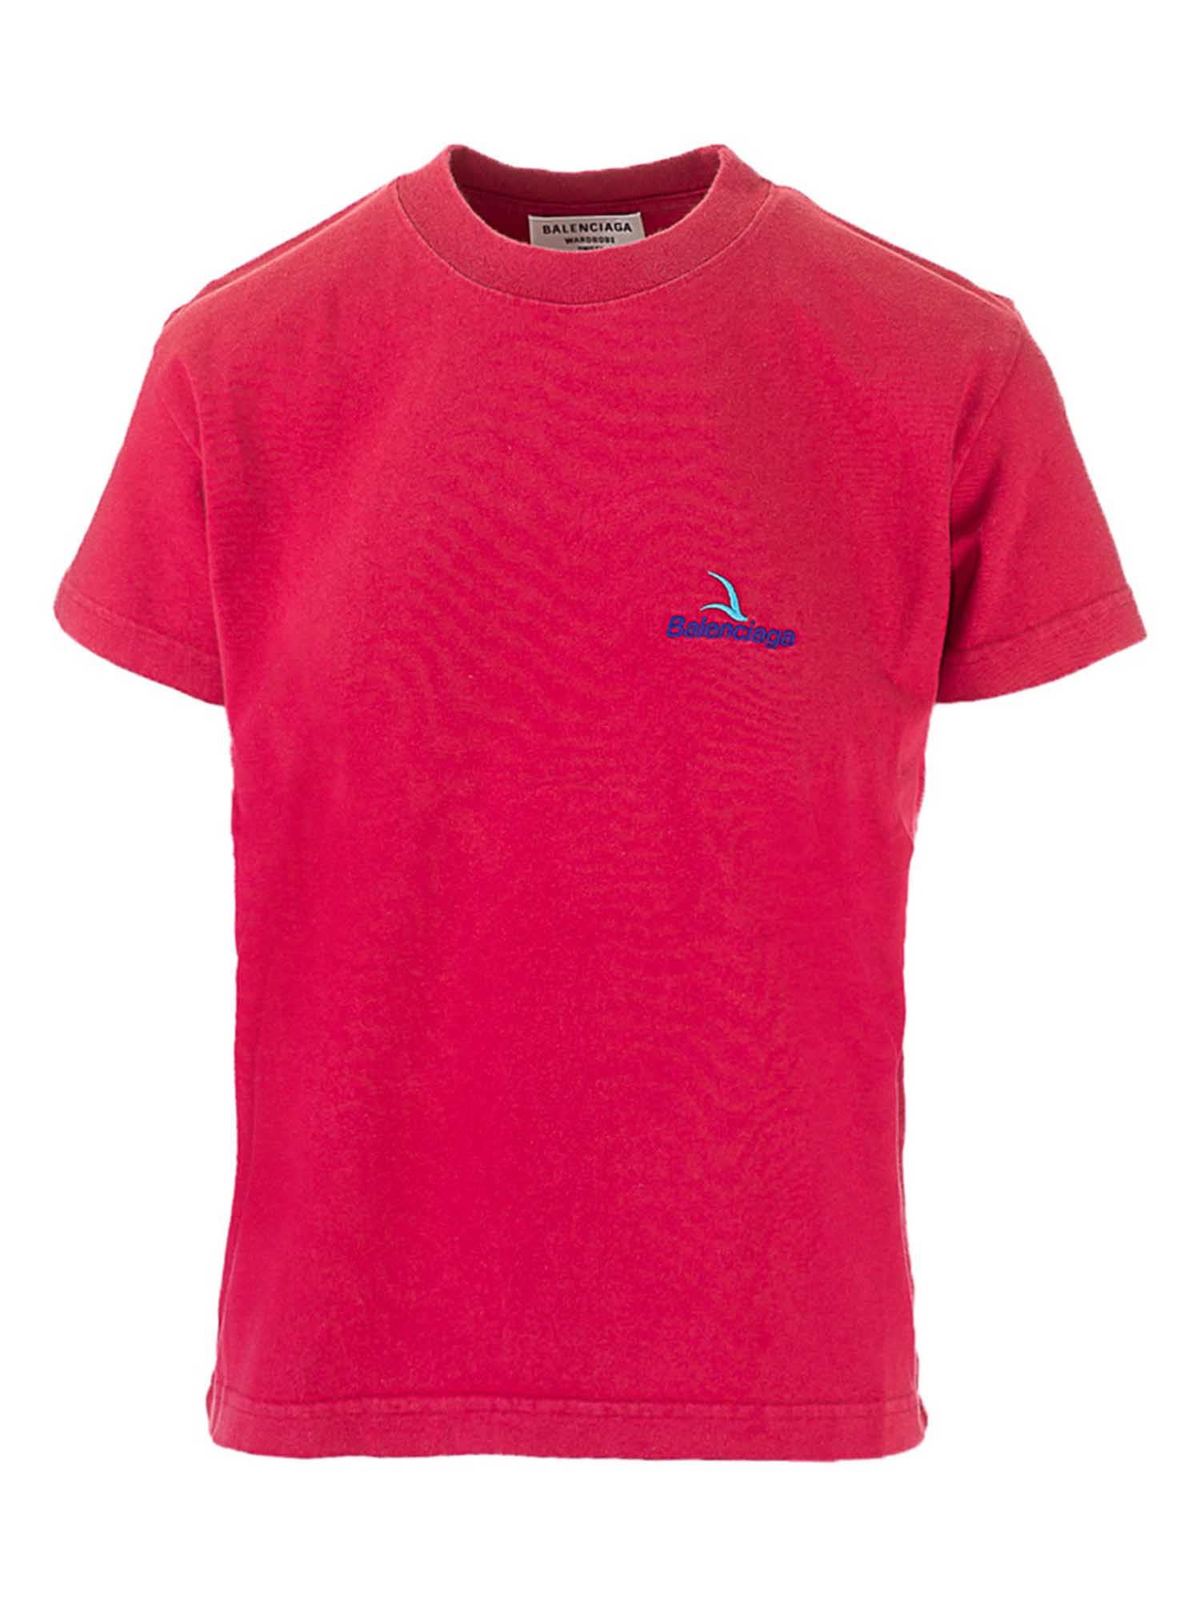 Balenciaga EMBROIDERED LOGO T-SHIRT IN RED